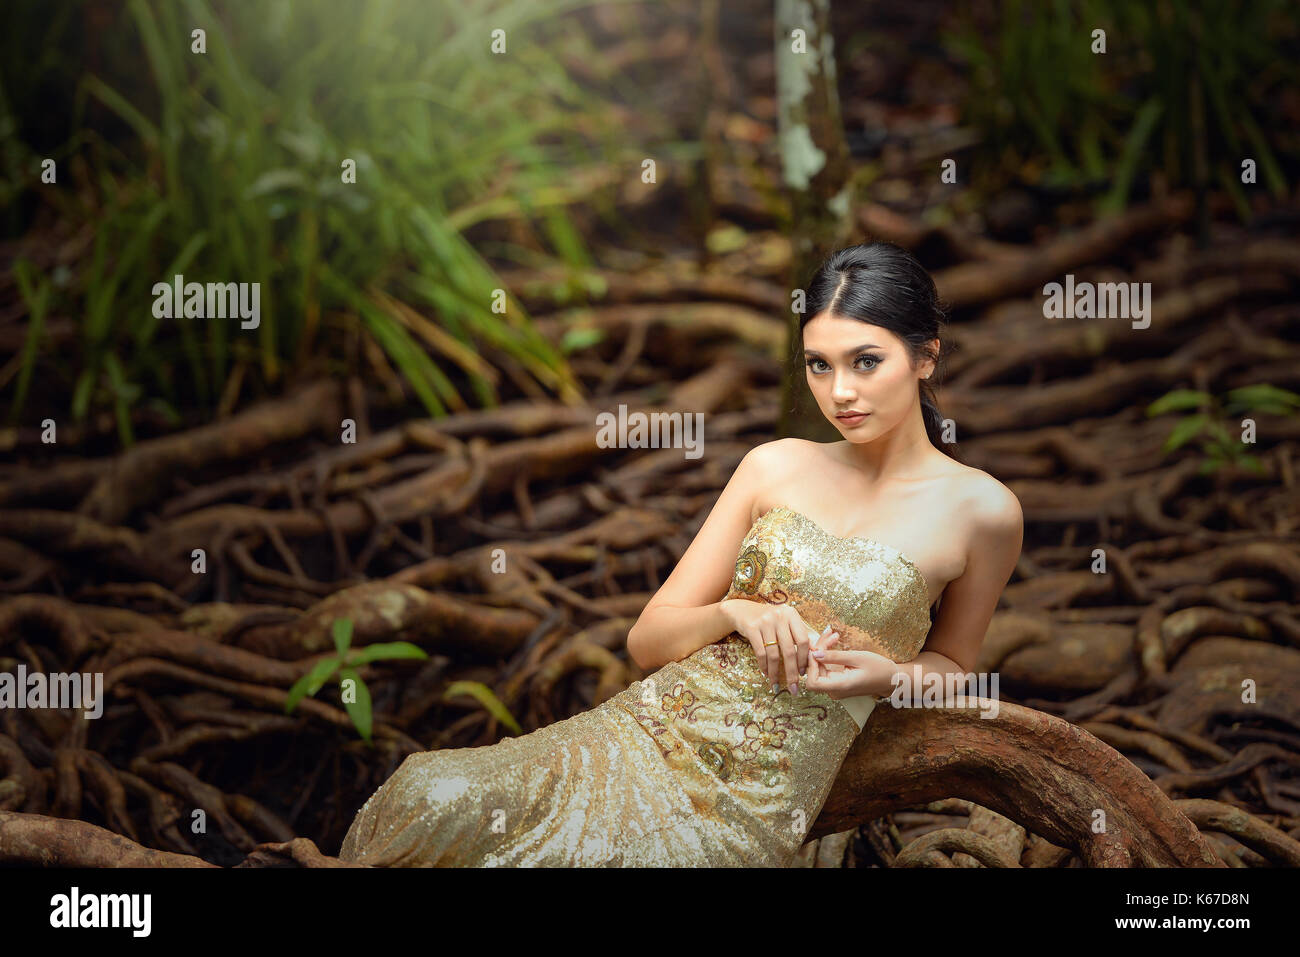 Portrait of a glamorous woman in forest, Thailand Stock Photo